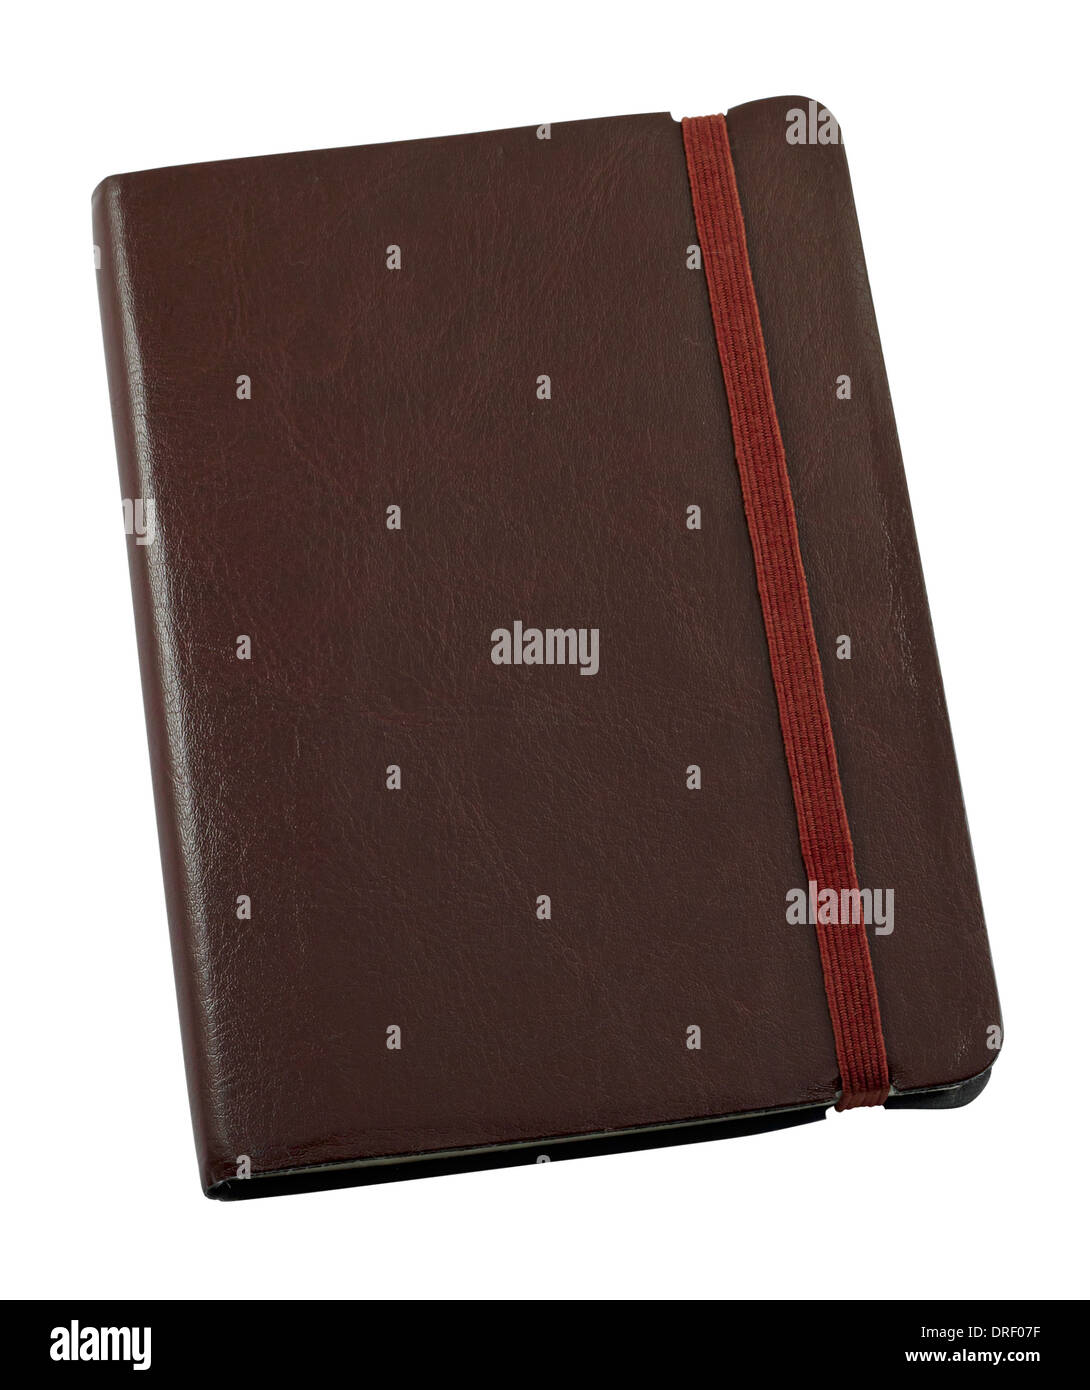 Pocket sized Leather bound personal journal for keeping a hand written record of memories Stock Photo